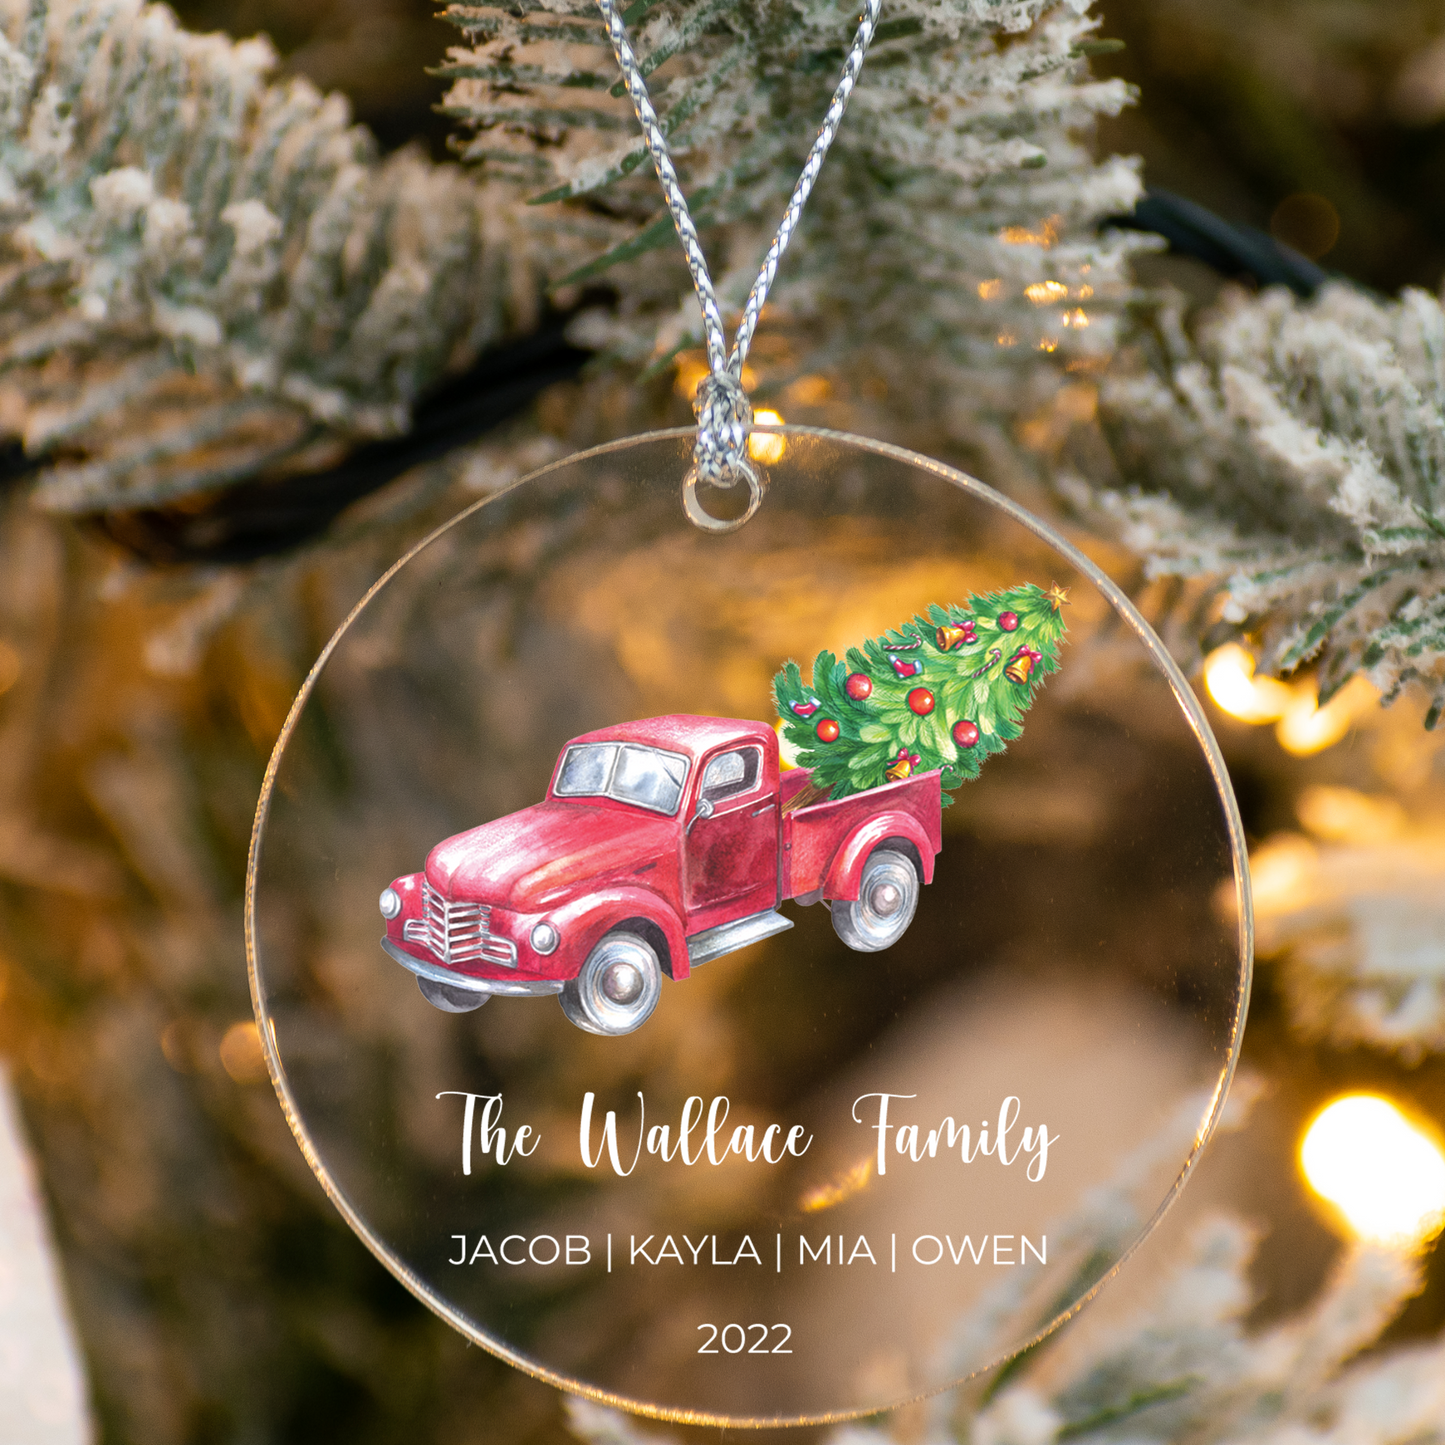 Family Christmas Ornament with Personalized Engraved Name